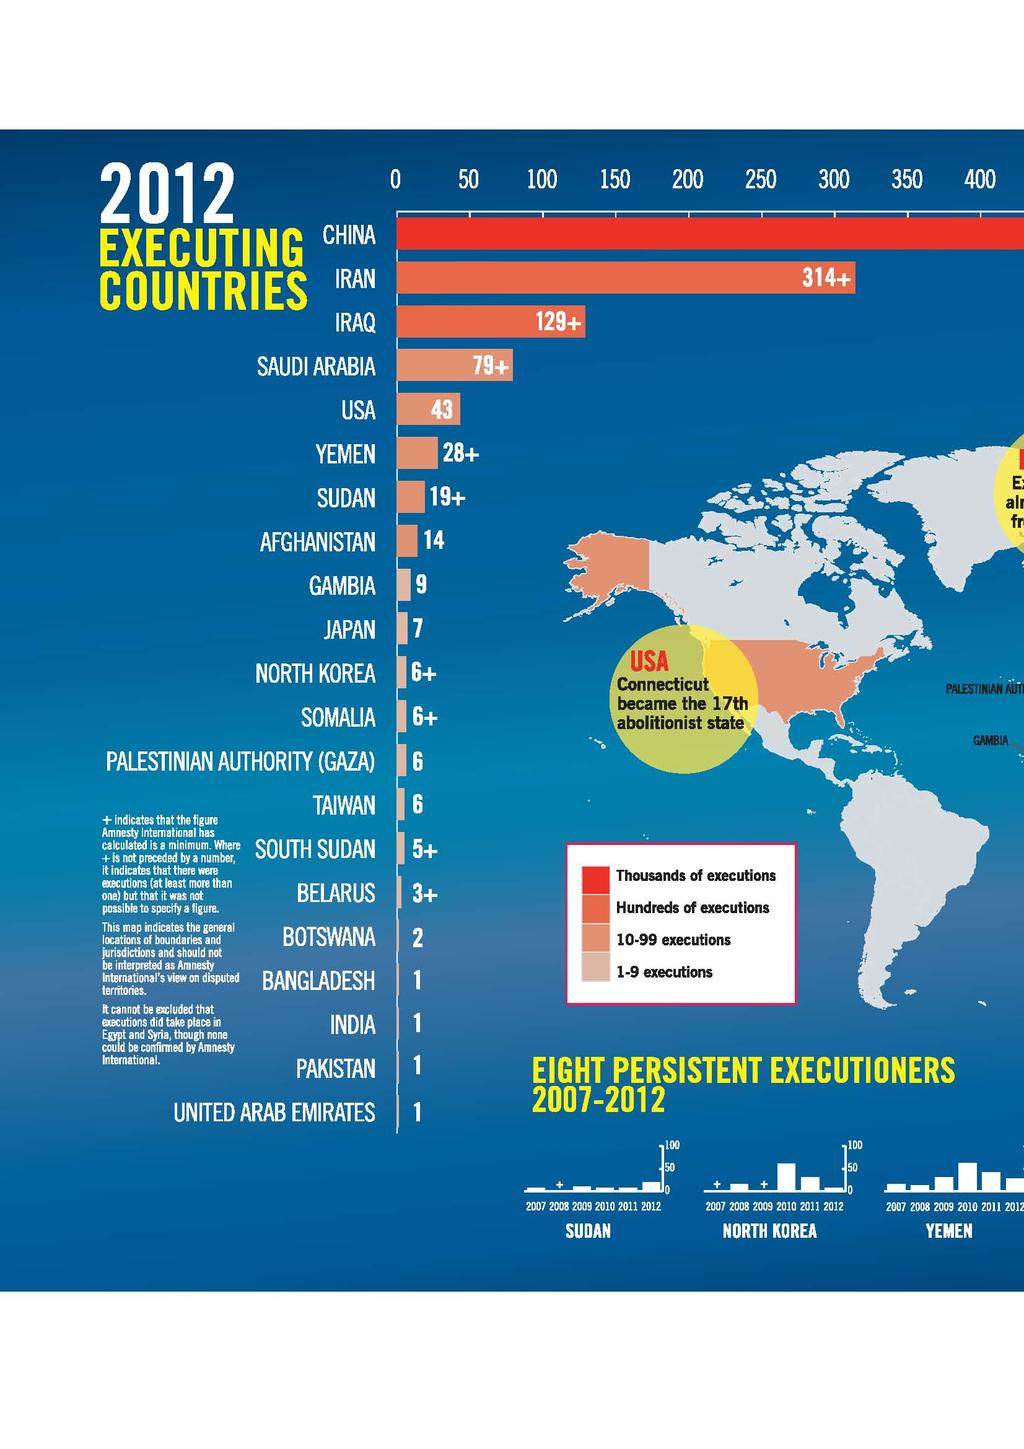 DEATH PENALTY FACTS AND FIGURES 2012 Thousands of executions Hundreds of executions